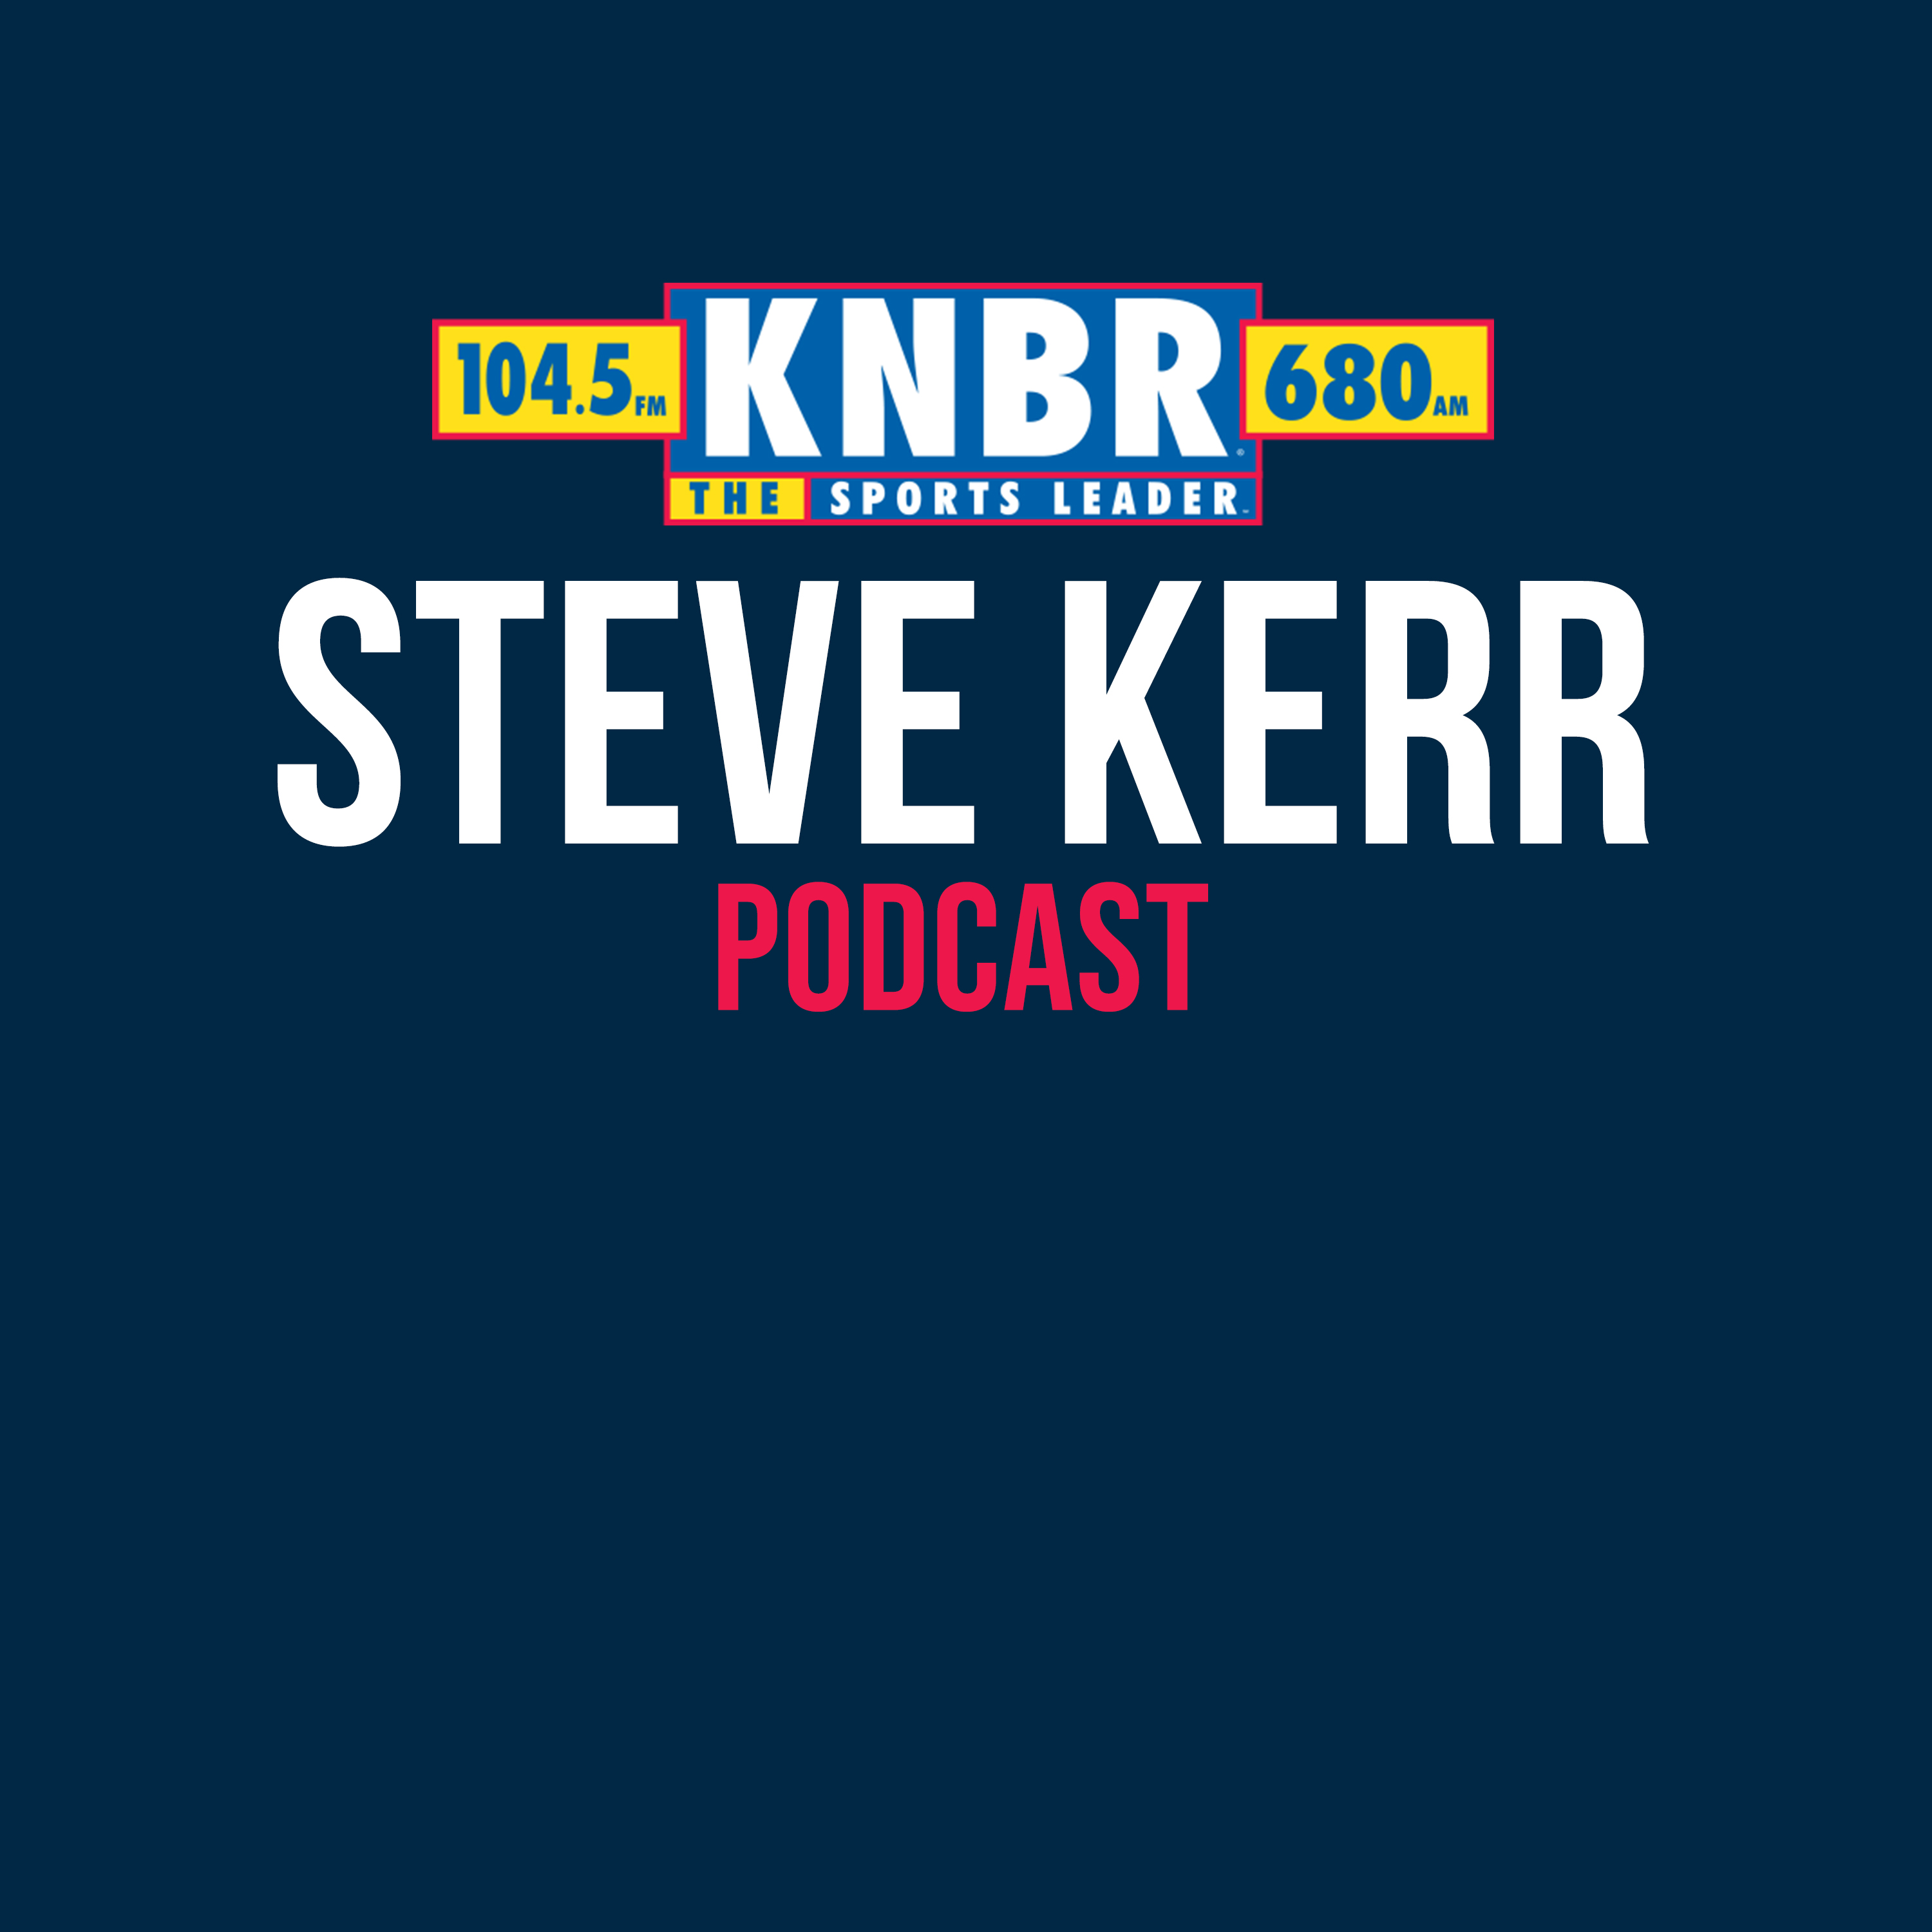 3-28 Steve Kerr joins Tom Tolbert to discuss Draymond's ejection & the huge back to back Florida wins